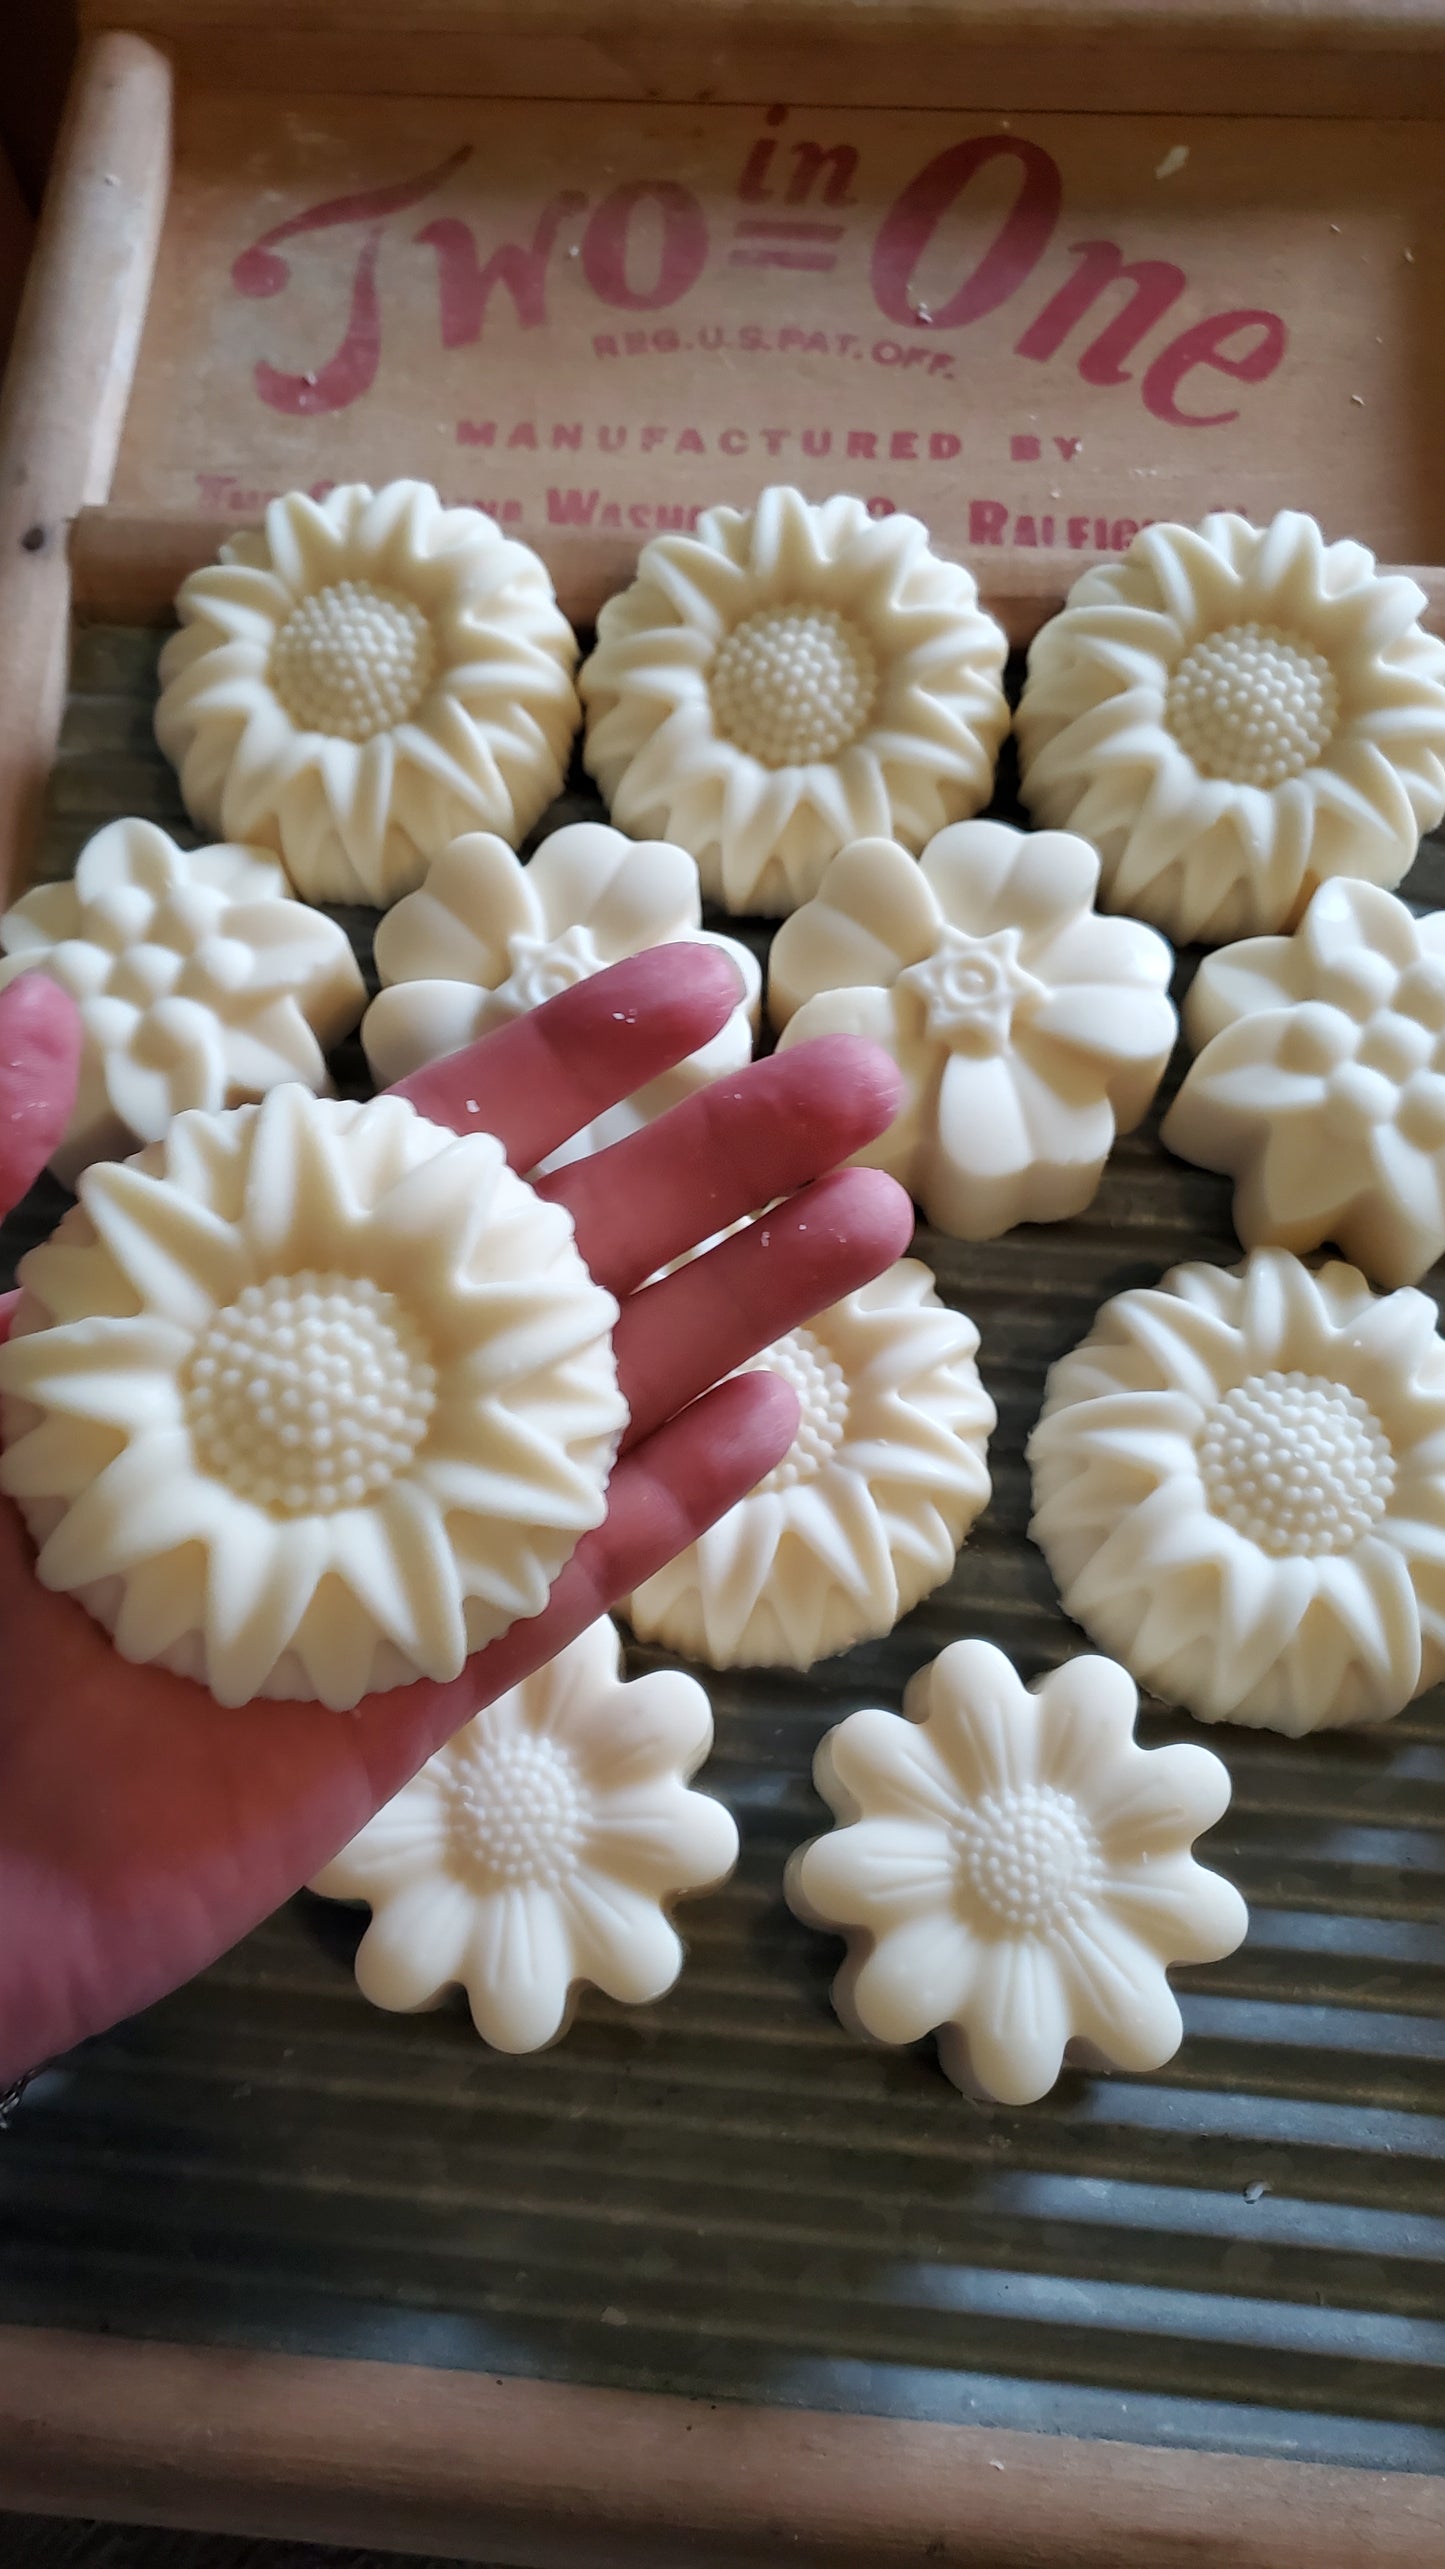 Just Plain floral edition soap shown in a woman's hand. 